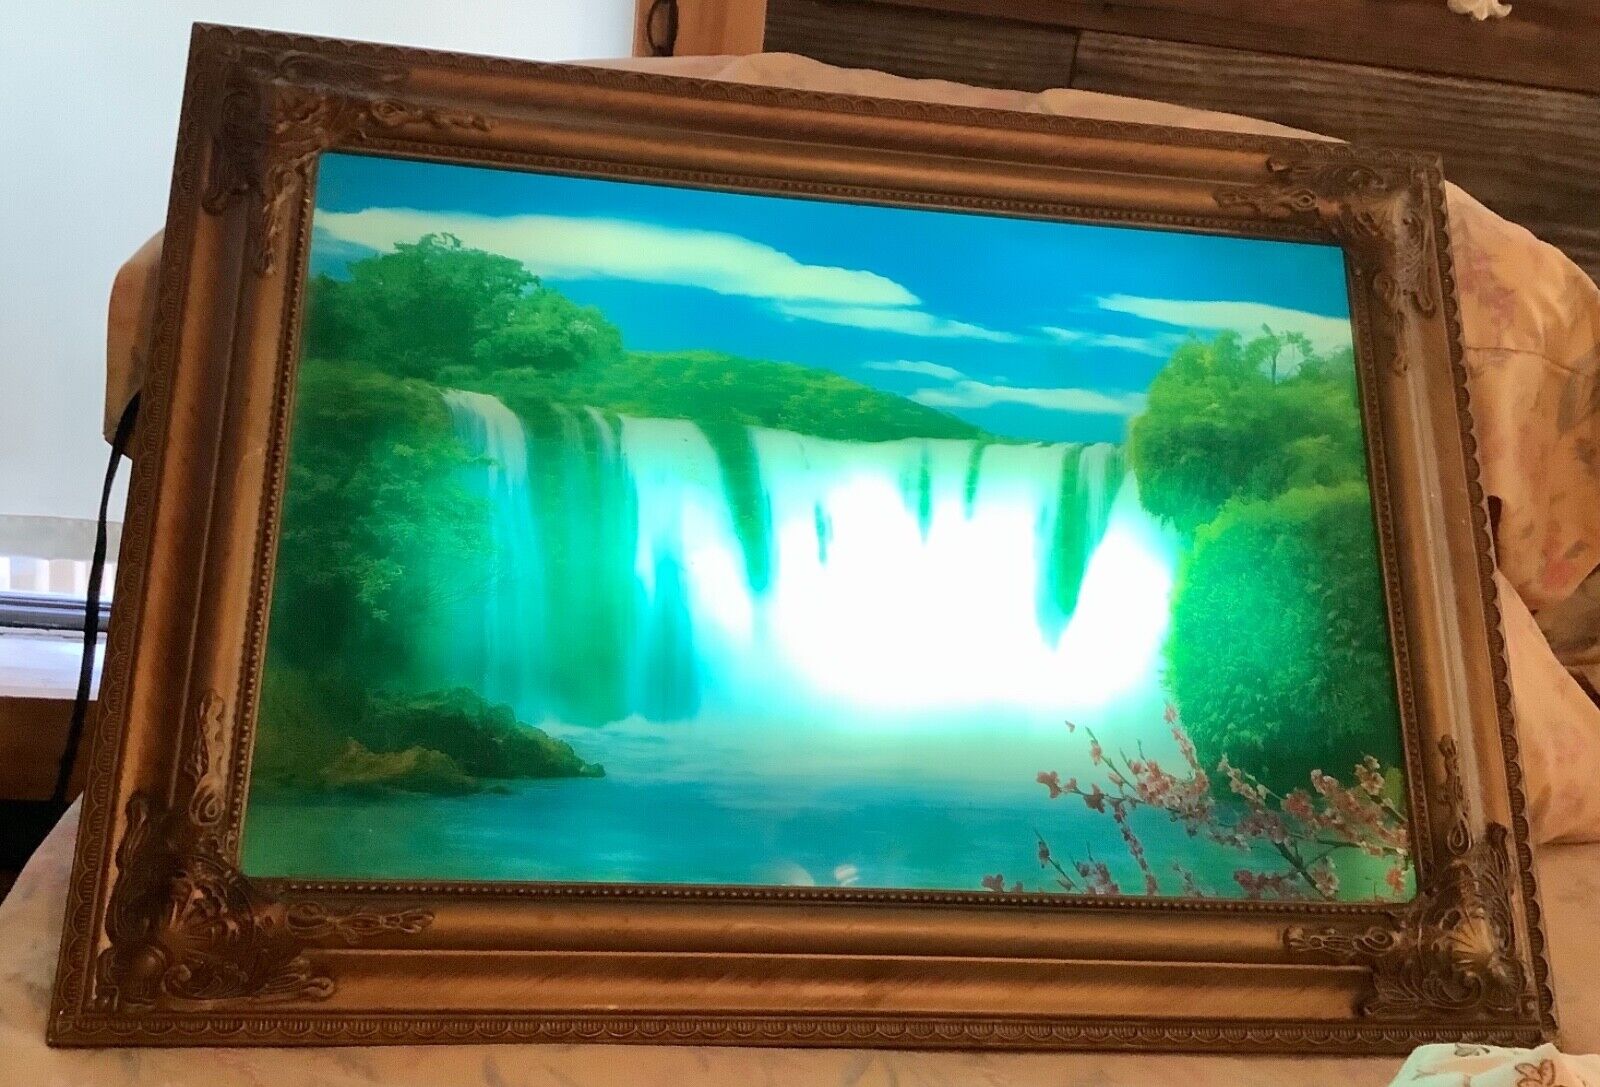 Vtg Framed Light Up Motion Waterfall Picture Frame Shadow Box